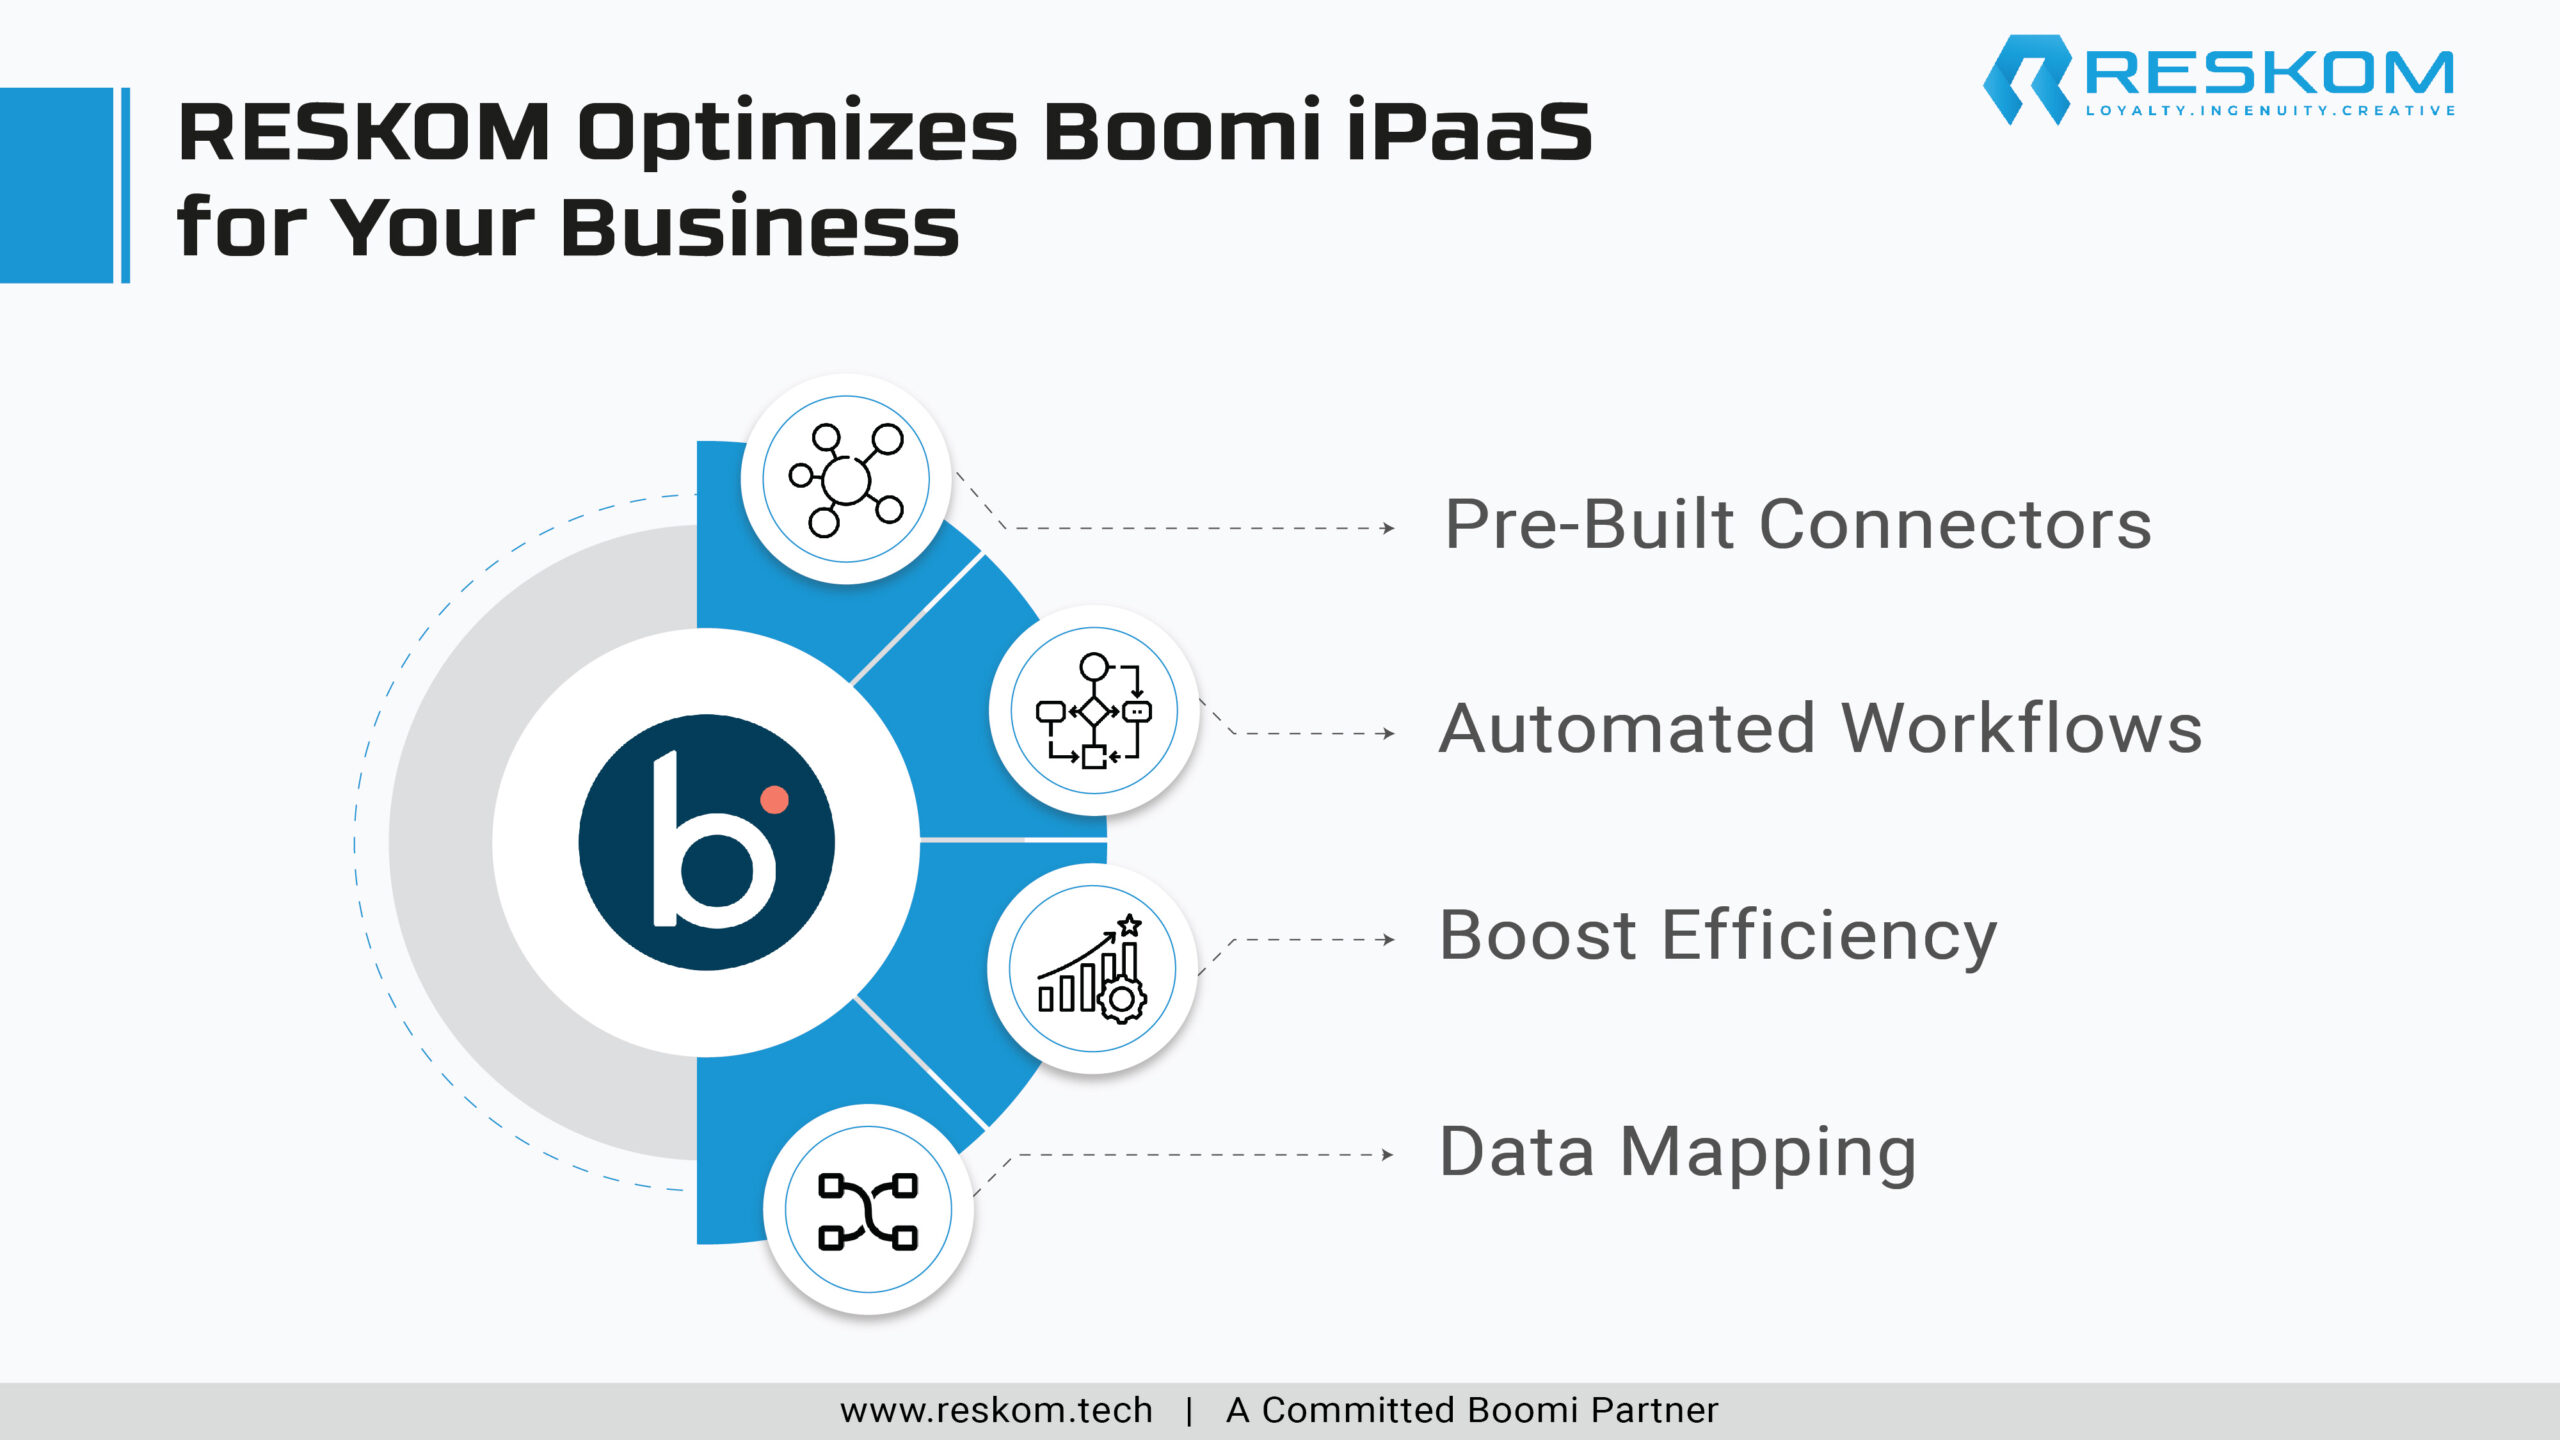 RESKOM Optimizes Boomi iPaaS for Your Business